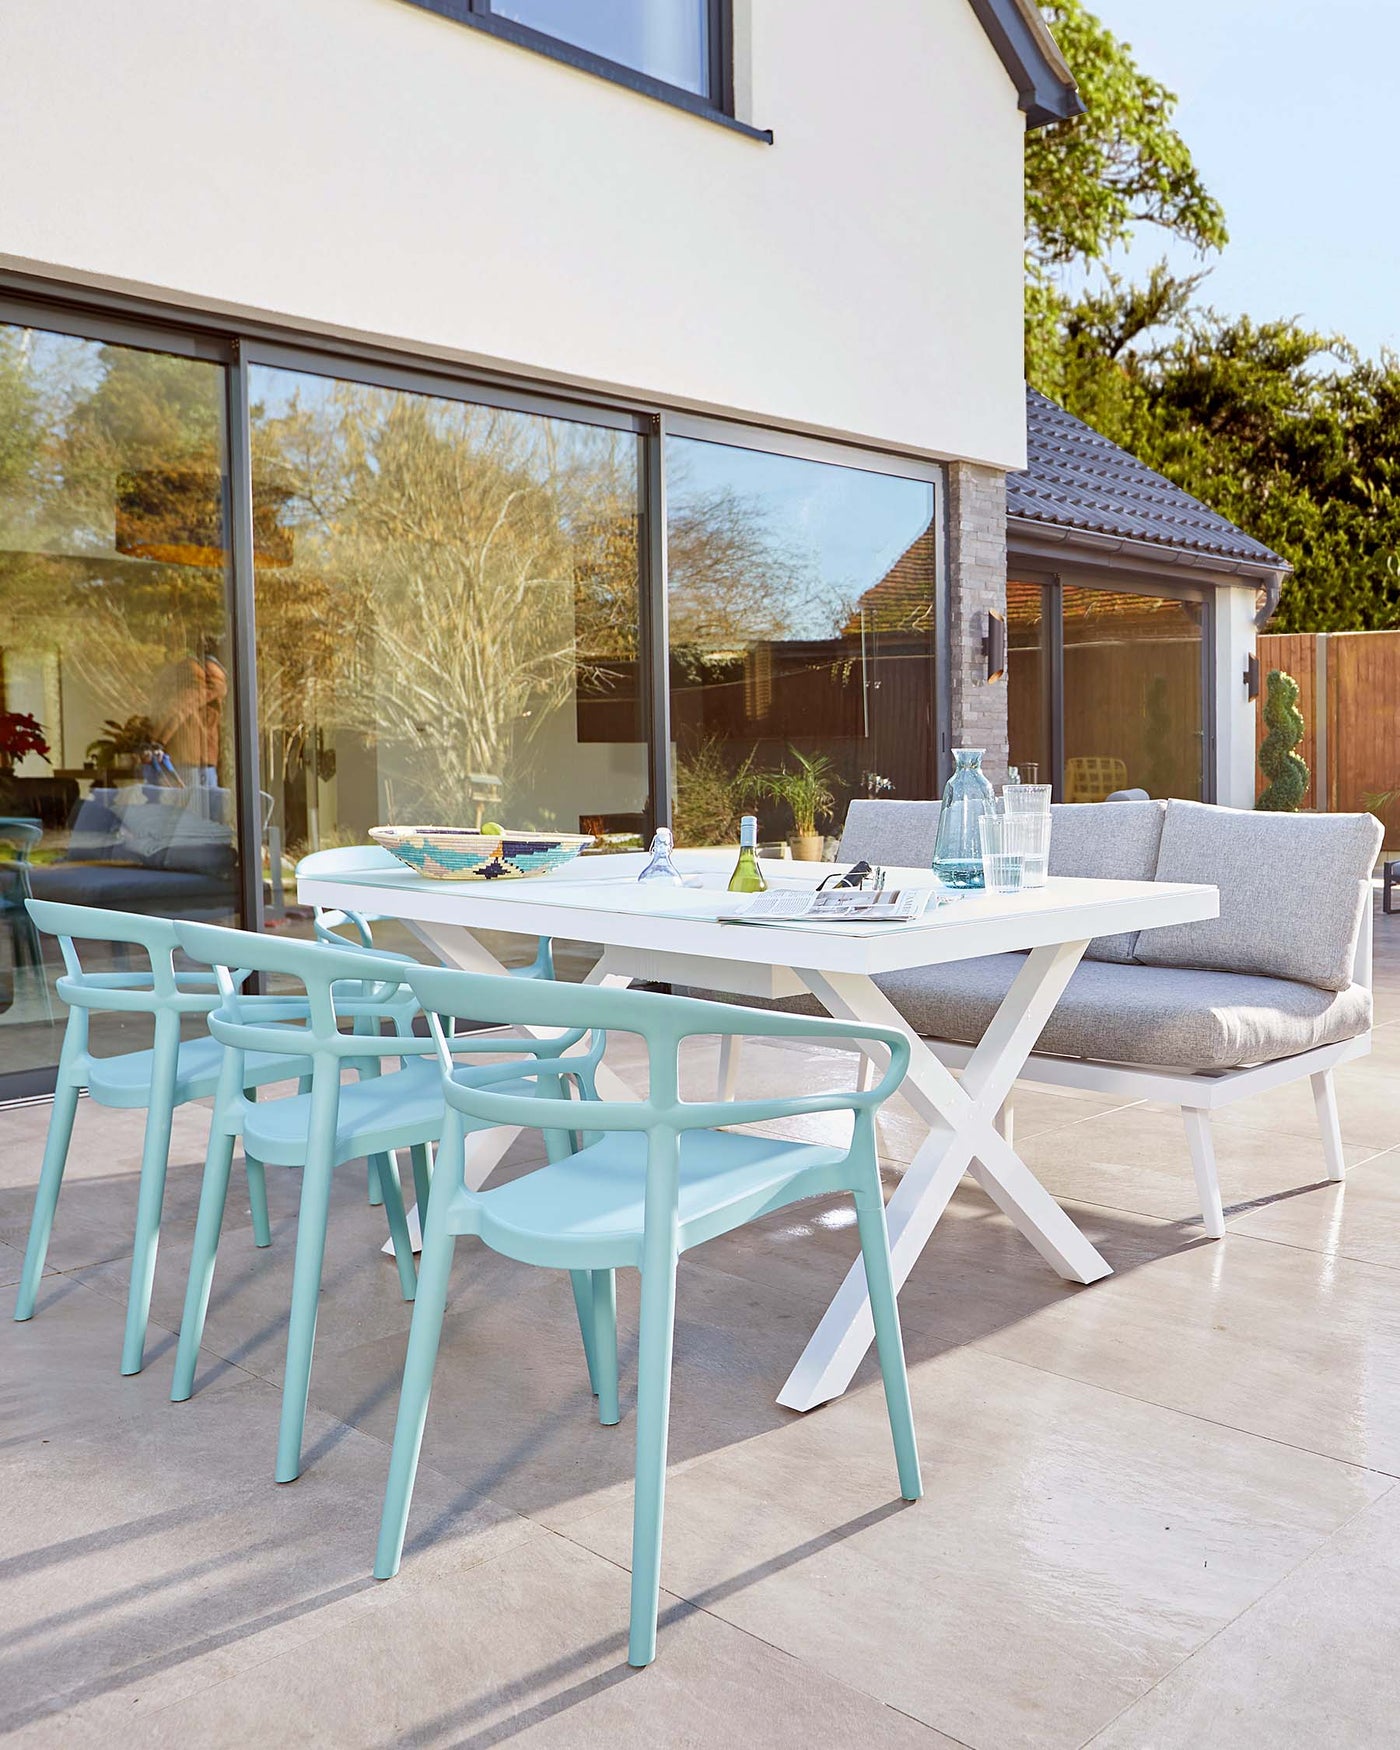 Modern outdoor dining furniture set featuring a white rectangular table with a clean design and cross-leg support, paired with six aqua blue, contemporary plastic chairs, and a comfortable lounge-style bench with grey upholstery on one side of the table. The set is on a patio area against a backdrop of sliding glass doors and a residential structure.